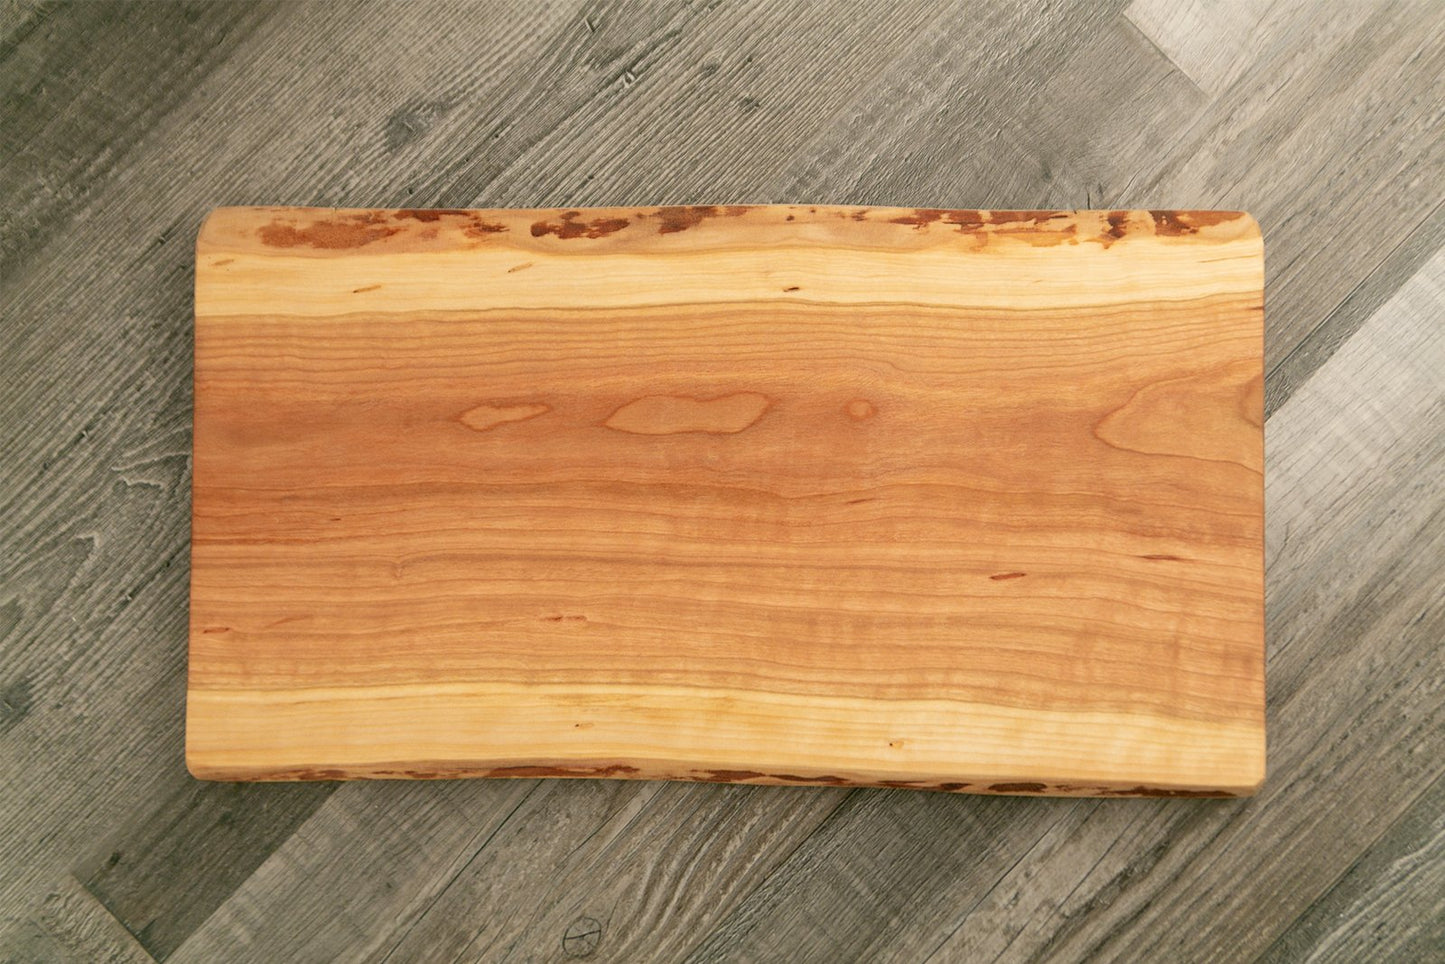 Live-Edge Cherry Artisan Charcuterie/Serving Board - 9"-10" x 16" - Etchified-Etchified-2600